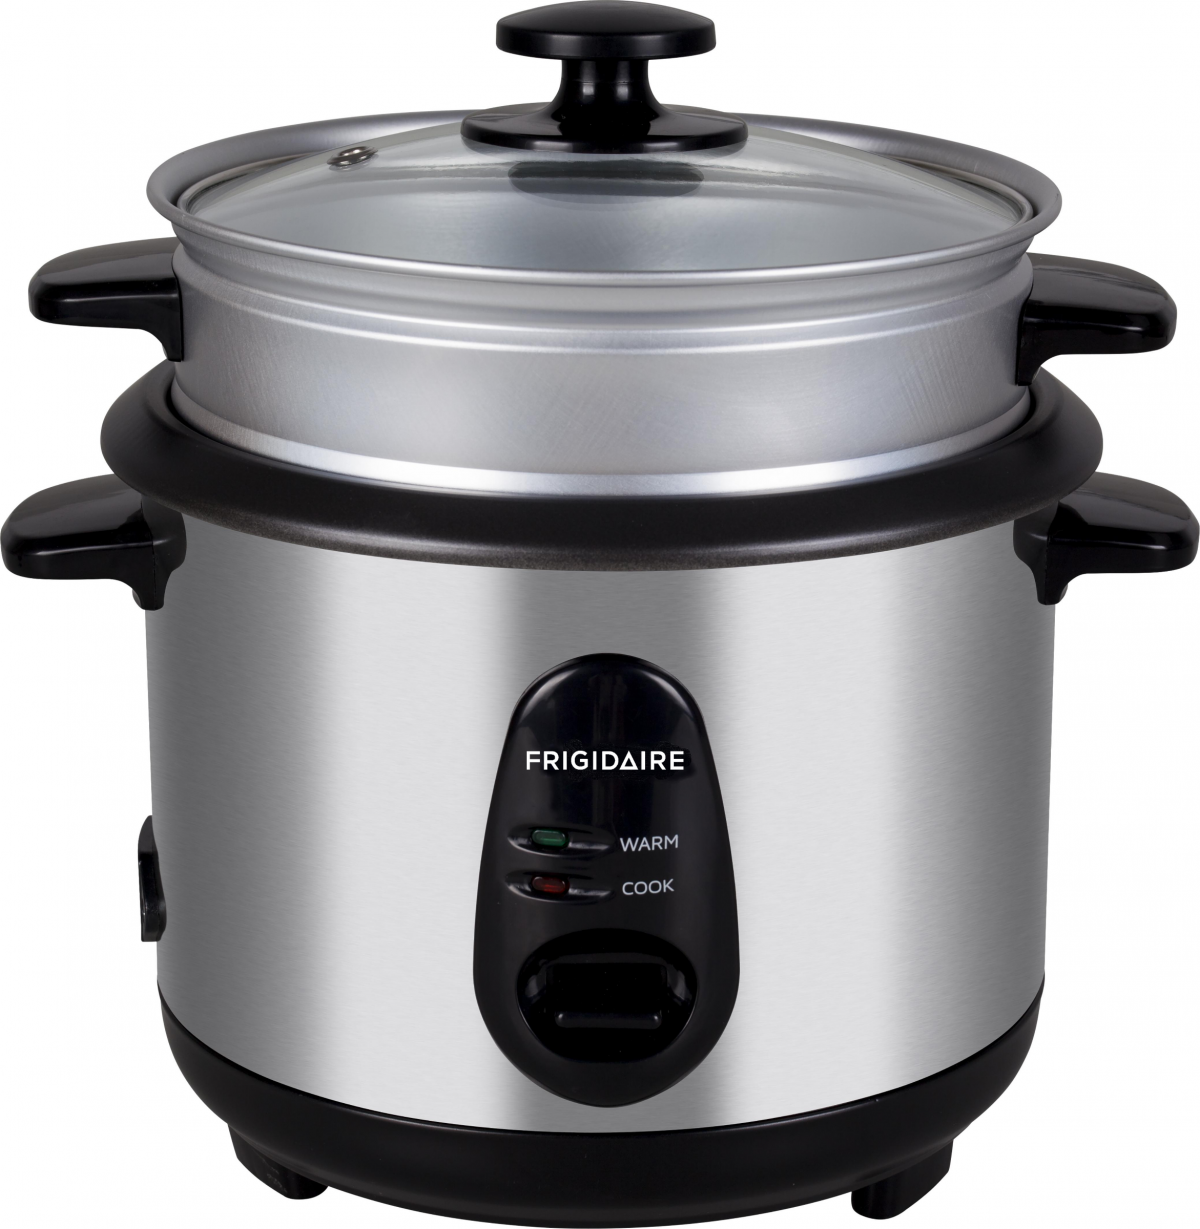 https://www.220stores.com/Shared/Images/Product/Frigidaire-FD9010-220-Volt-5-Cup-Rice-Cooker-For-Export-Overseas-Use/FD9010.png